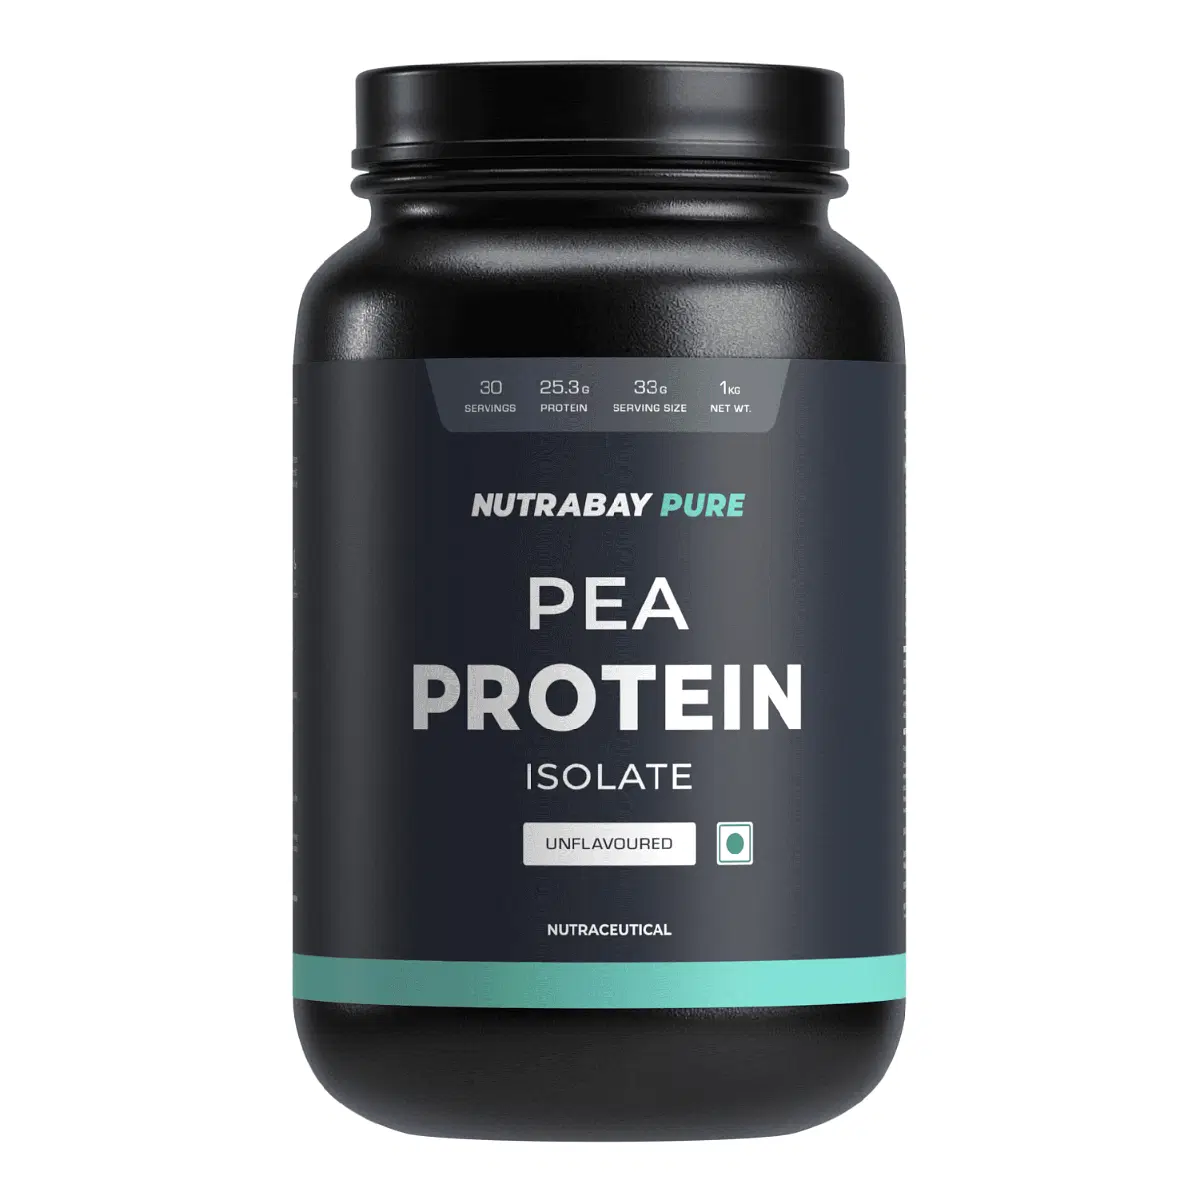 Nutrabay Pure Pea Protein Isolate